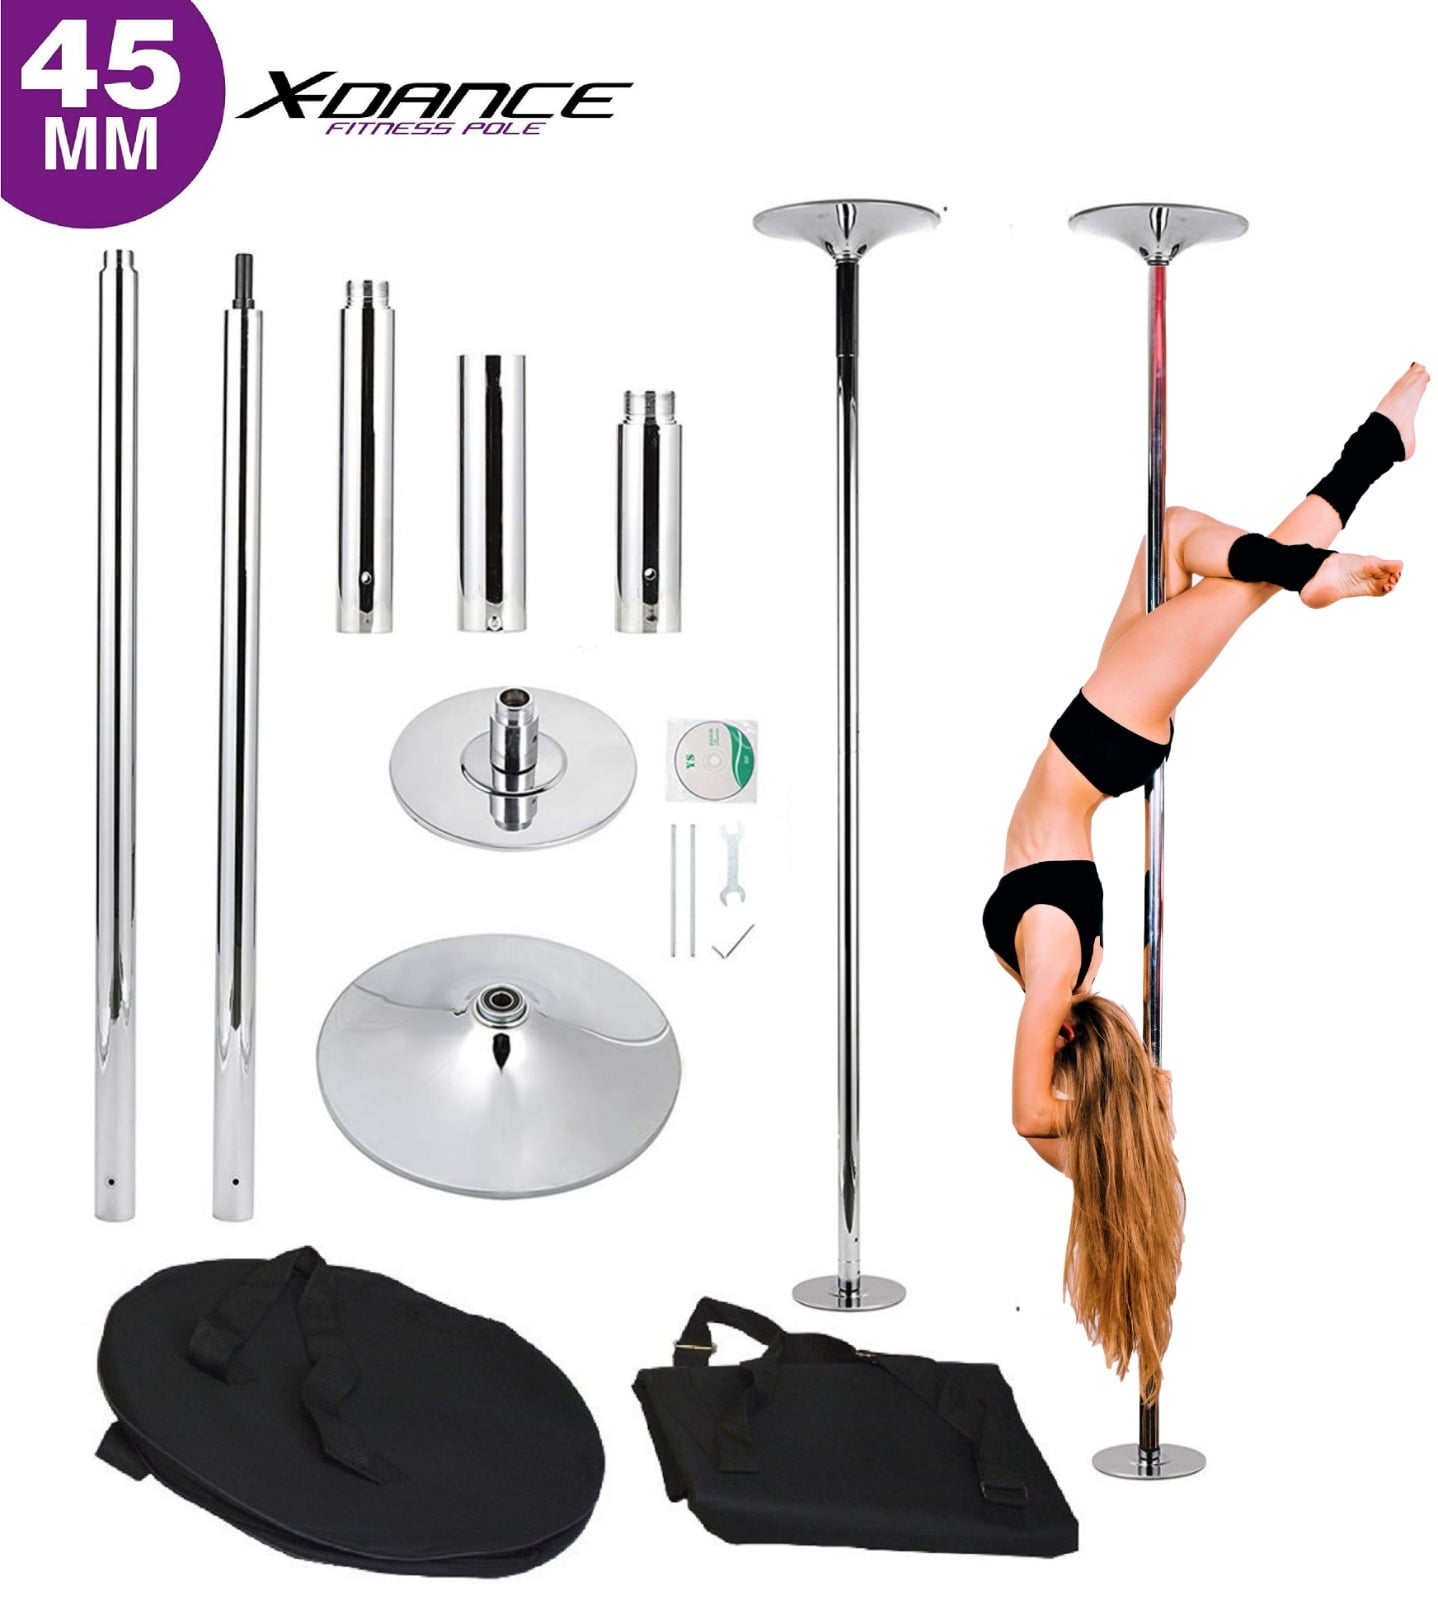 Fitness Exercise Dance Tube for Home Pub Party Gym 45mm Diameter Spinning and Static Dancing Pole RAYLON Portable Stripper Pole 90-115 Adjustable Height 